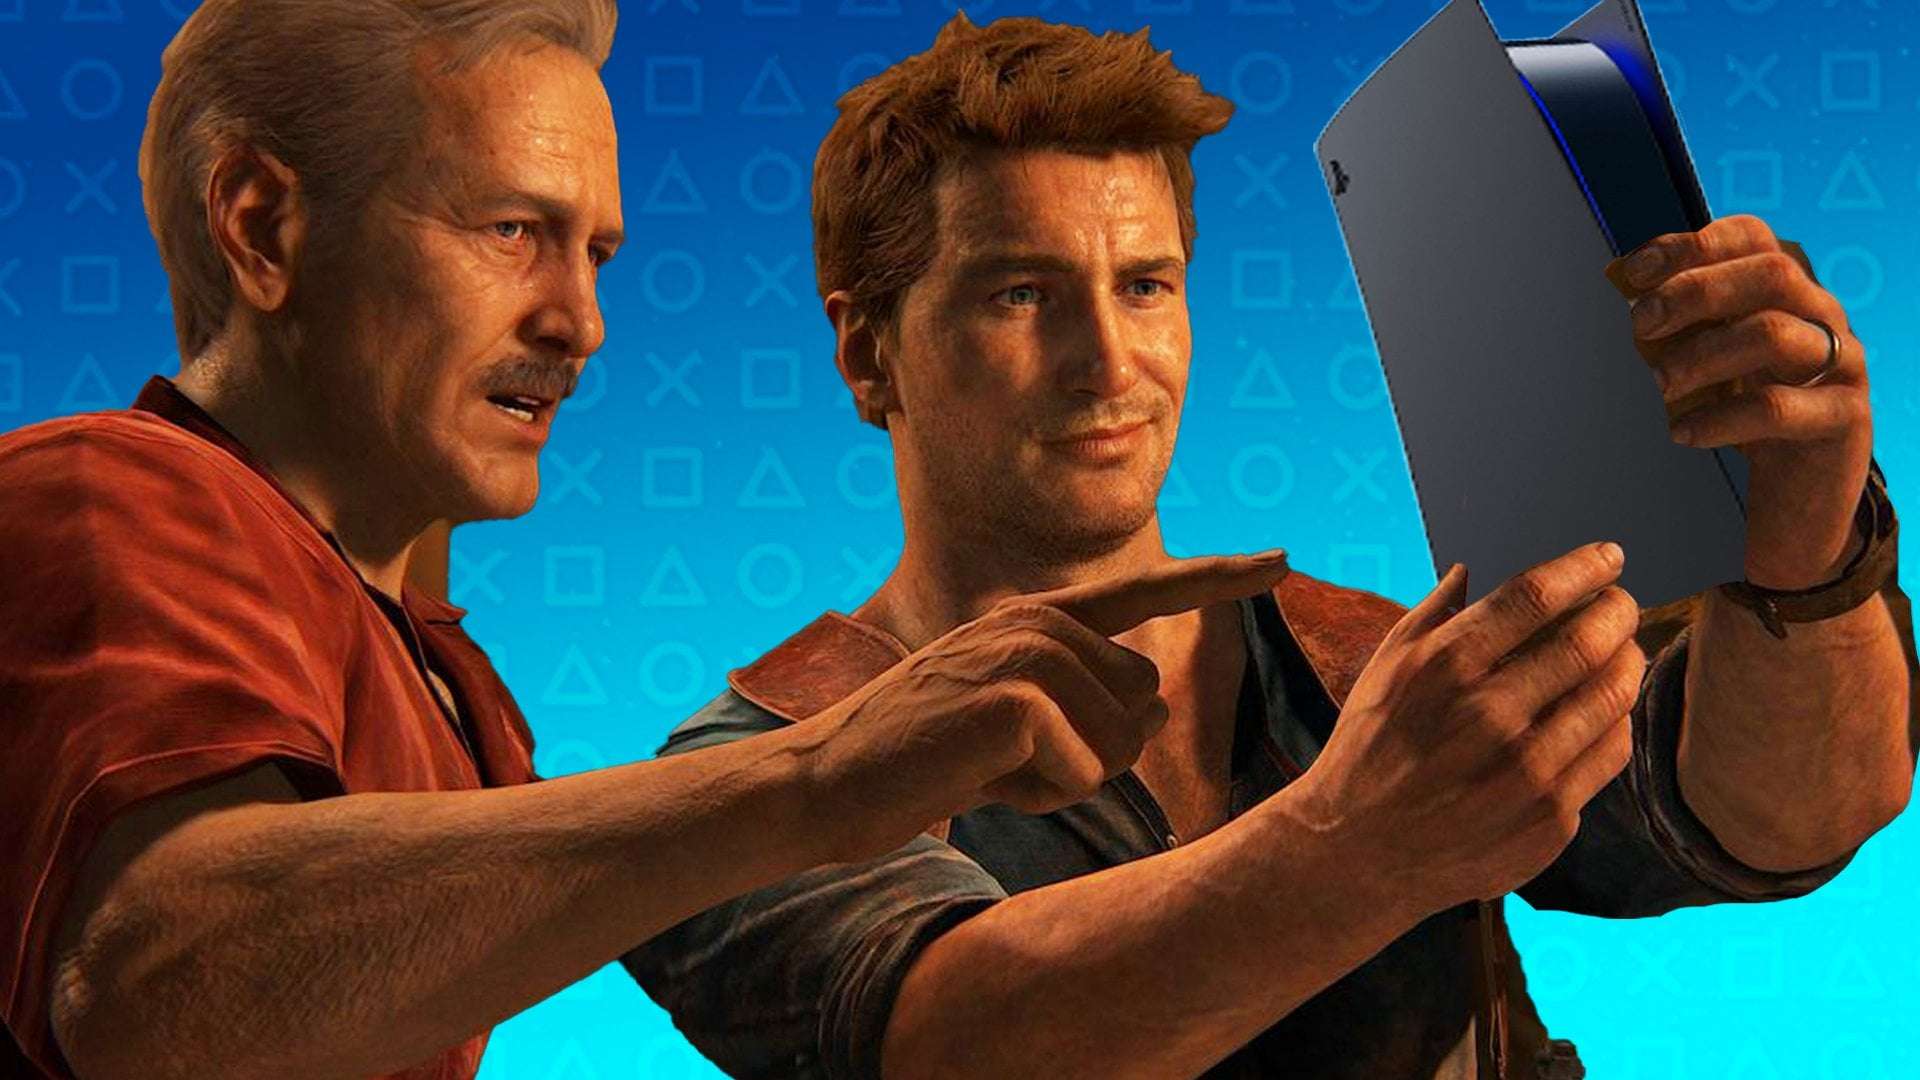 image for Naughty Dog is in danger of missing the boat with the PS5